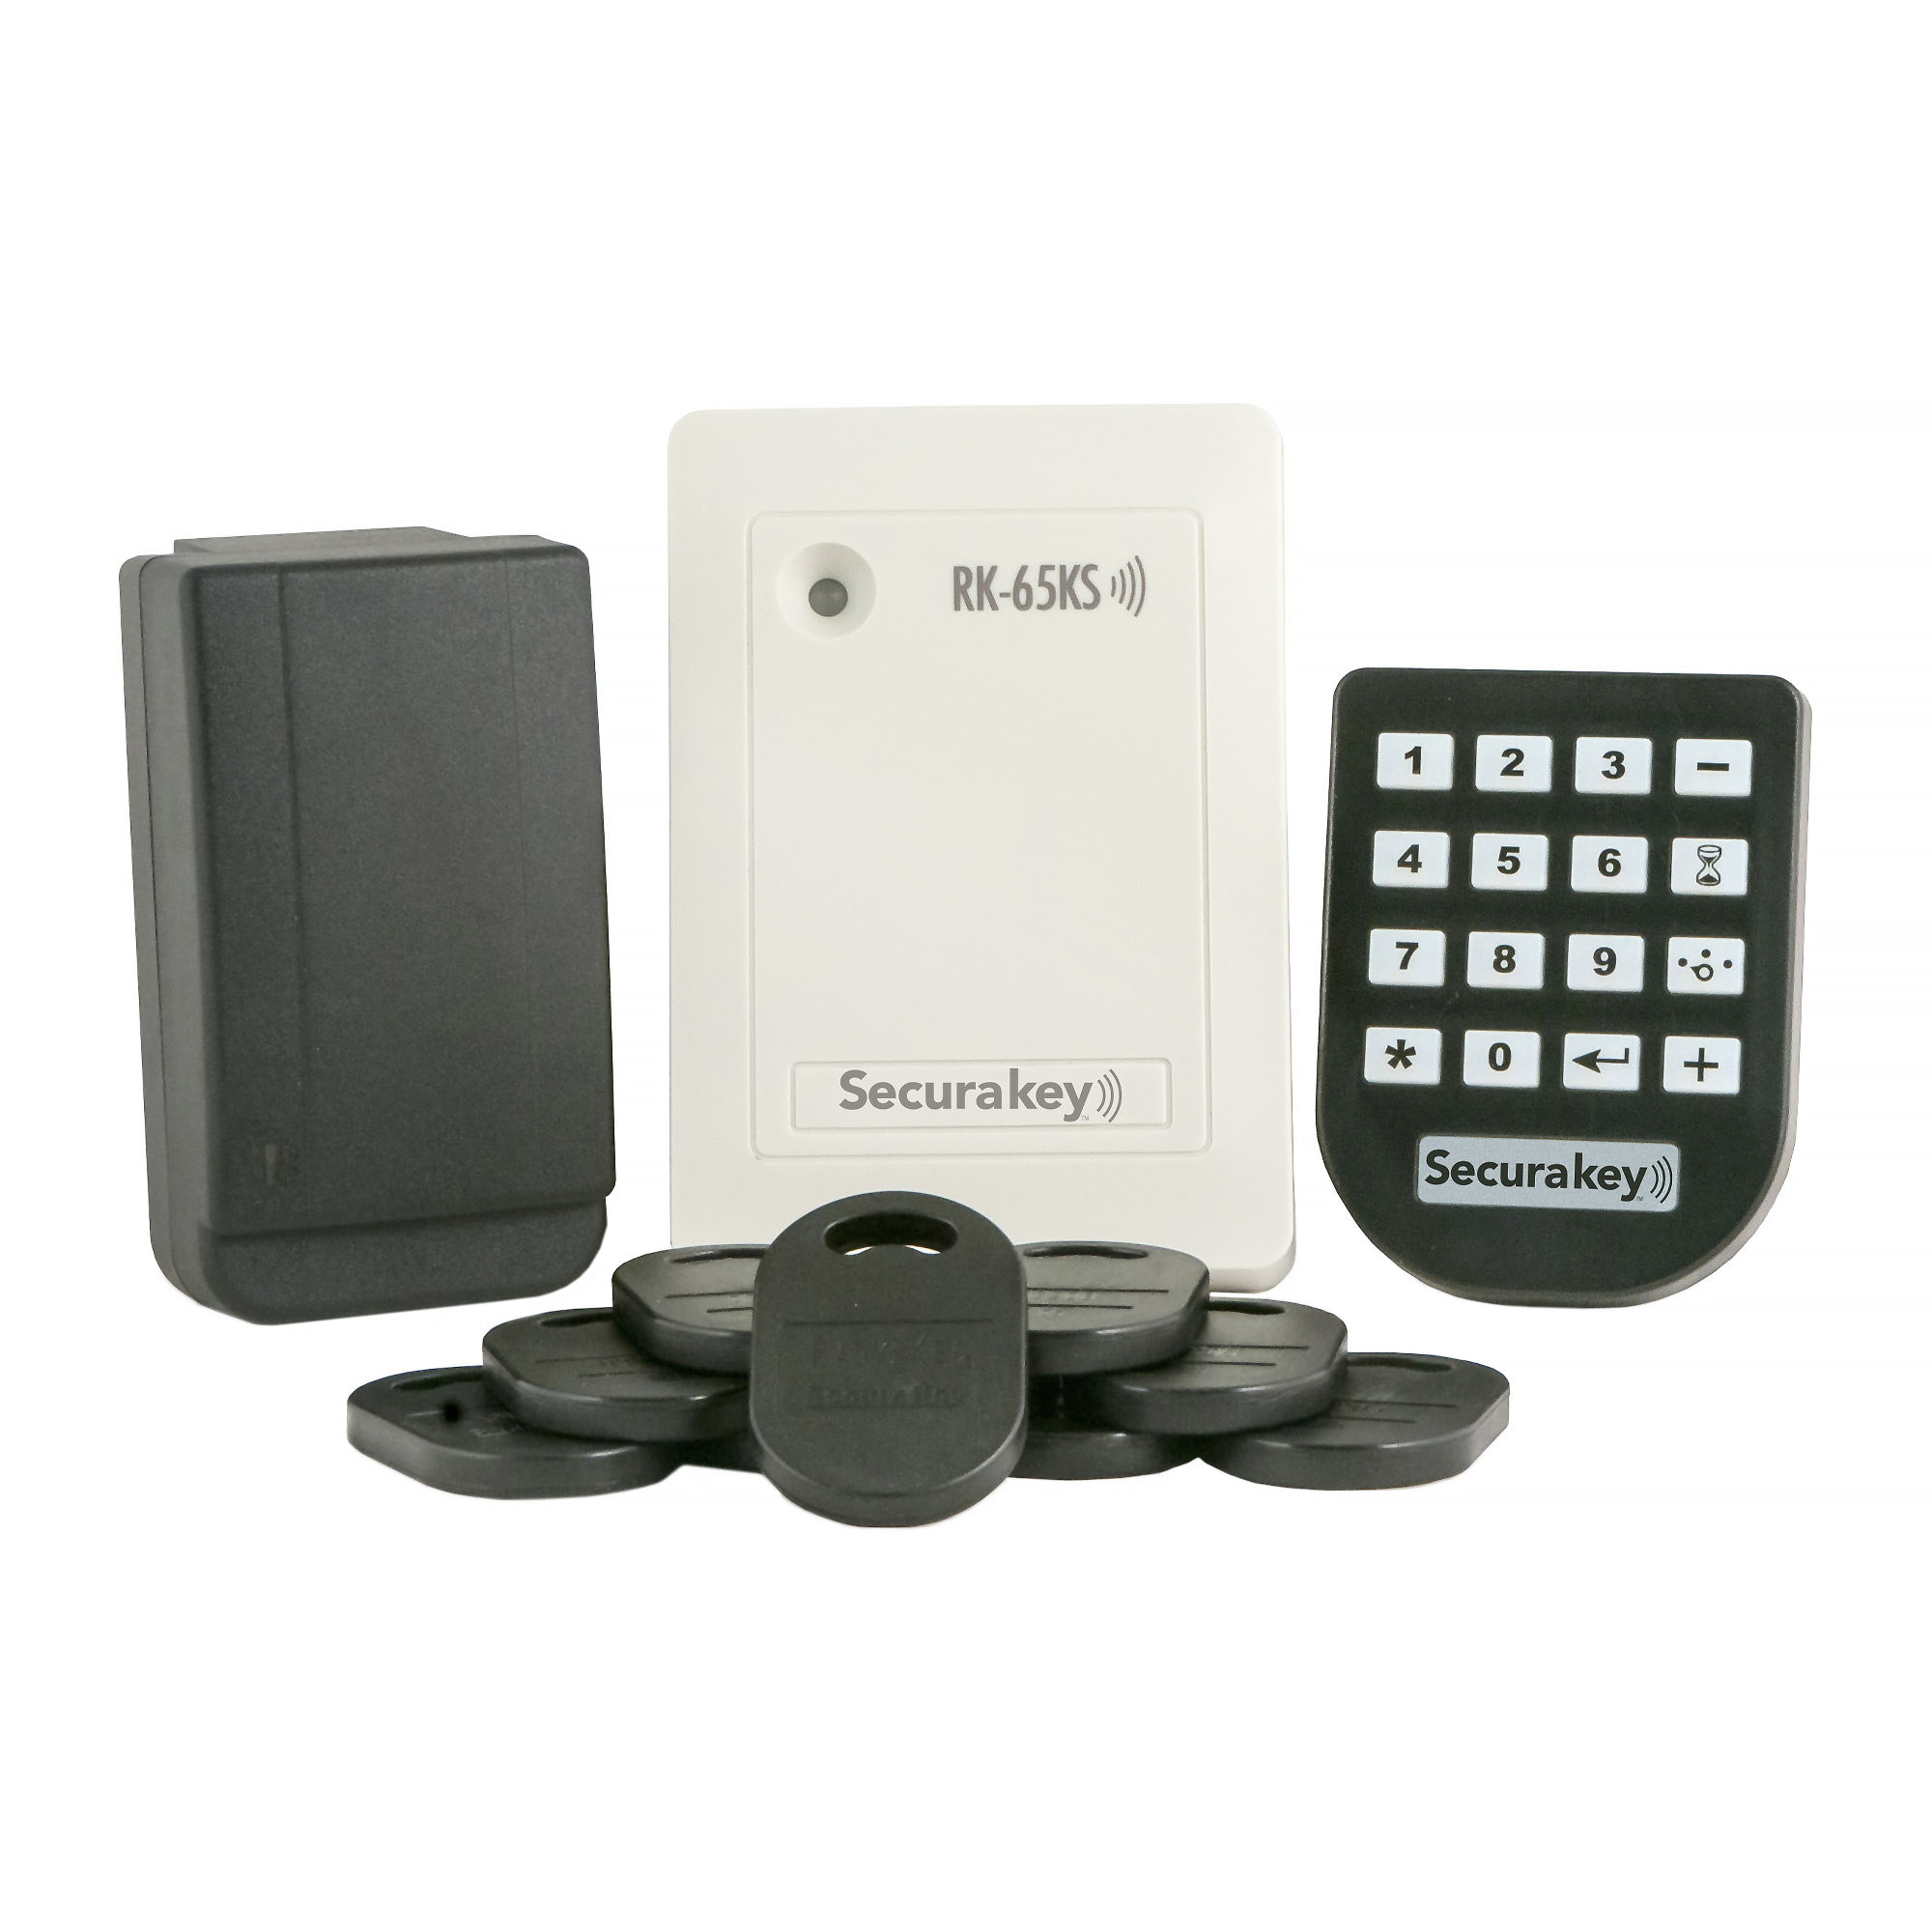 Shop SecuraKey Proximity Cards and Readers